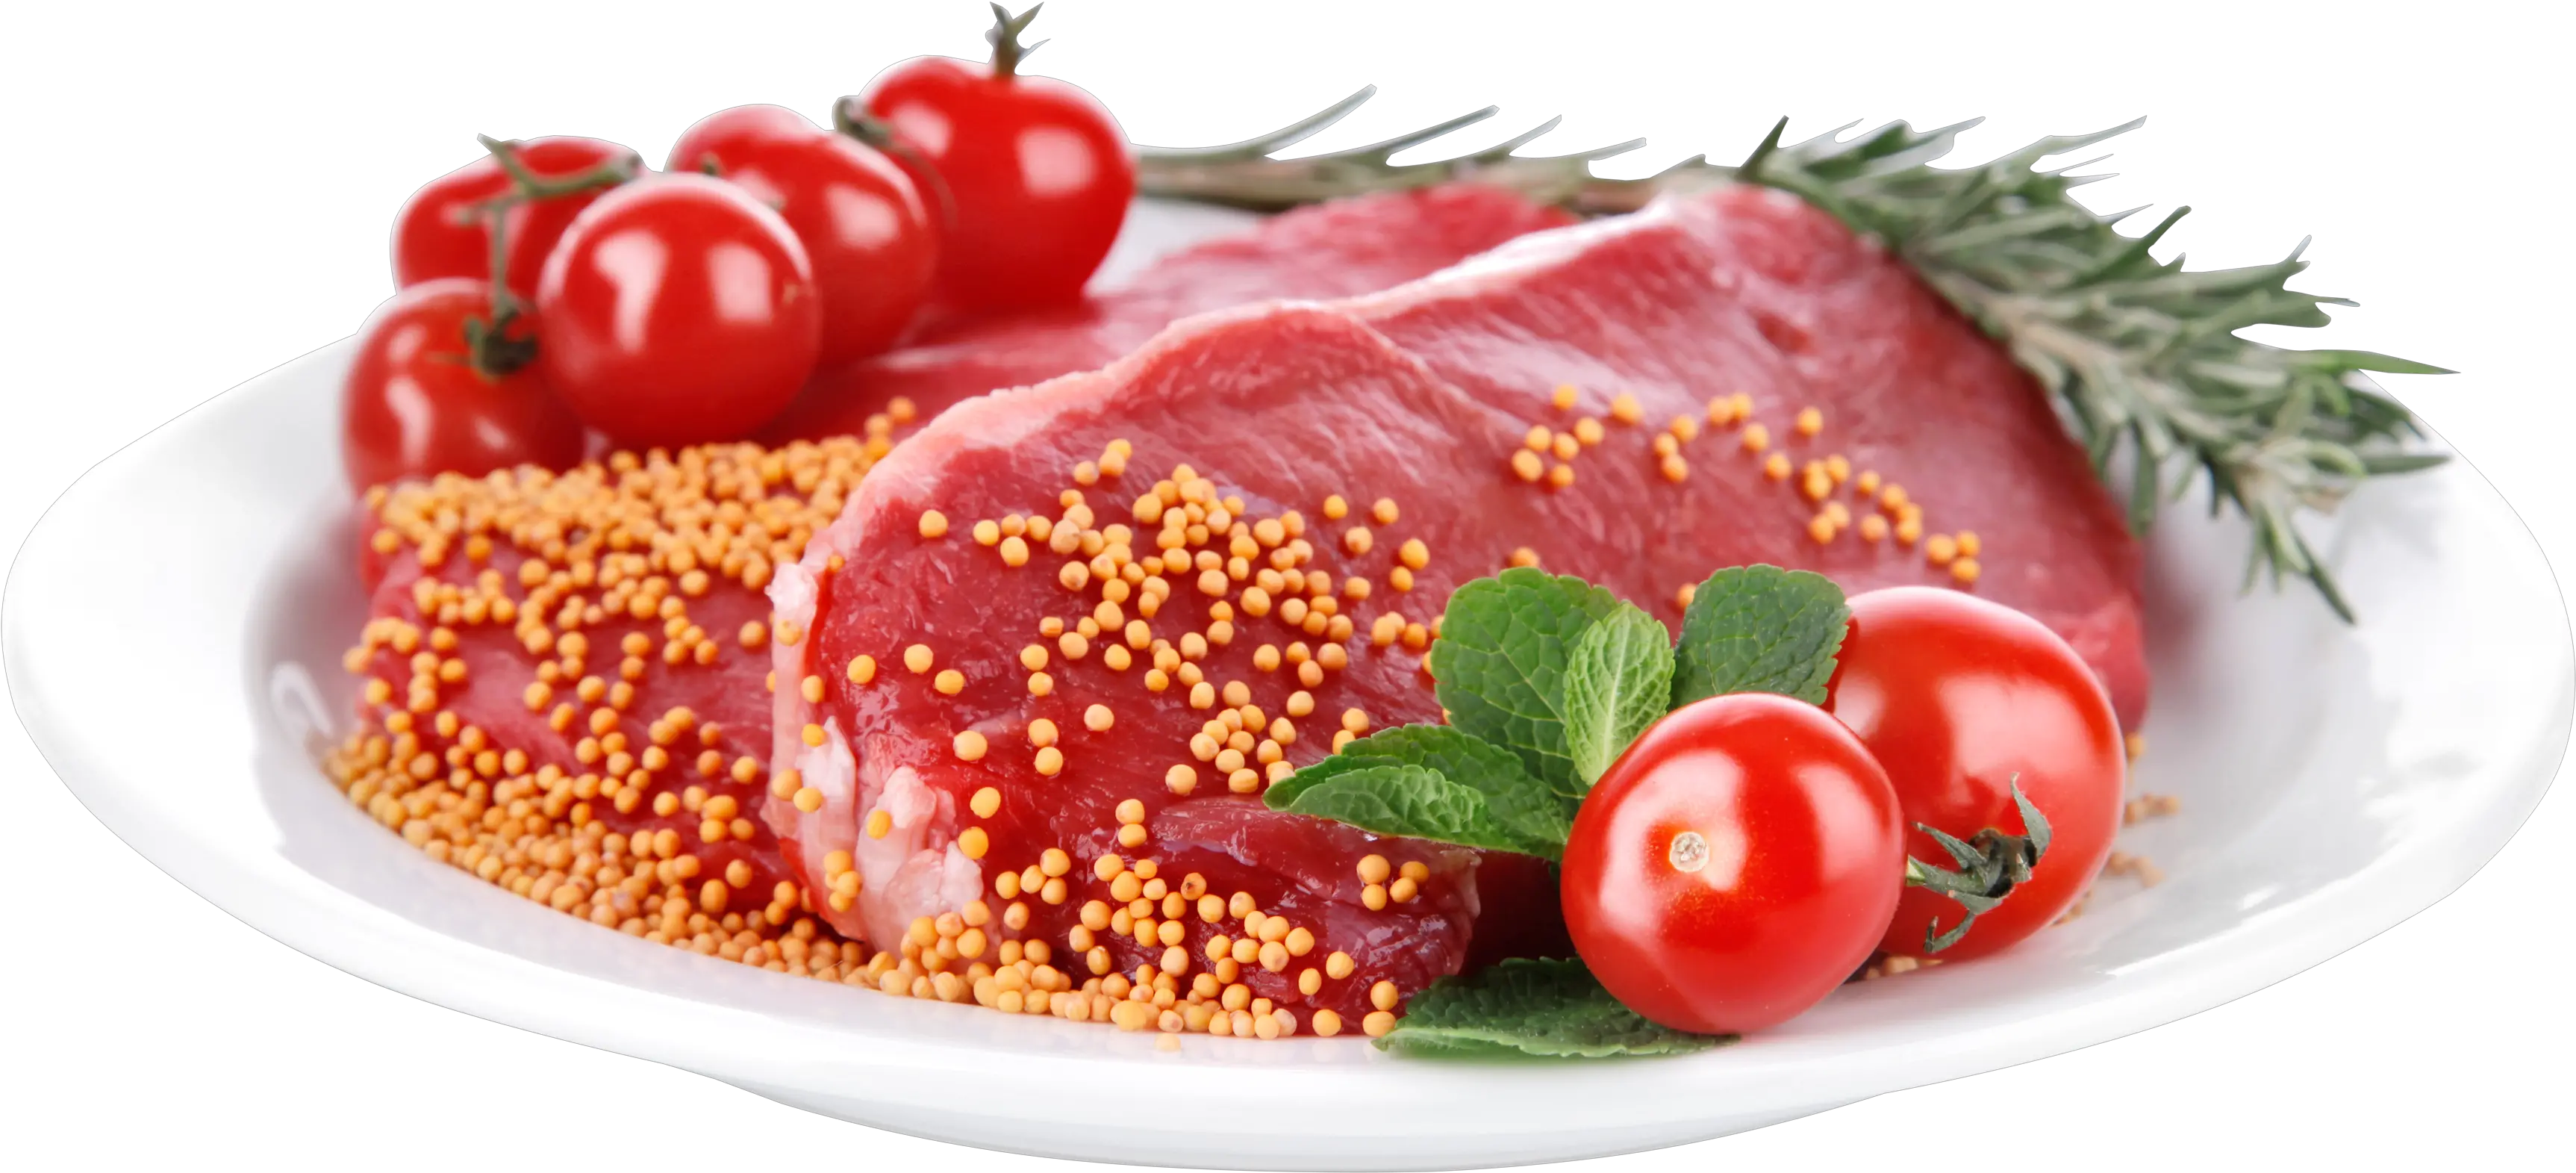 Download Meat Png Image For Free Meat Png Meat Png